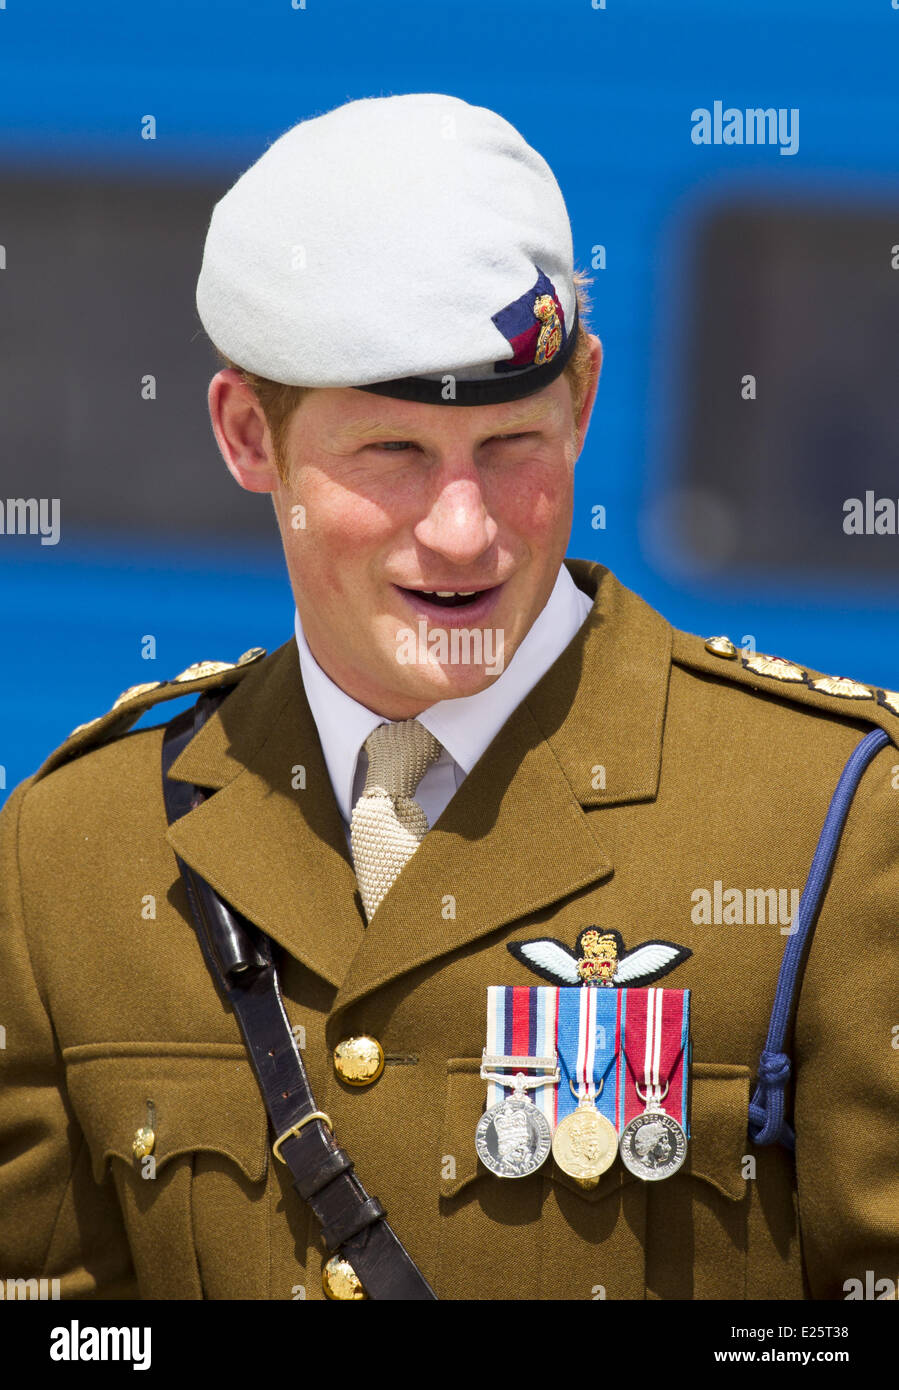 Britain's Prince Harry, Commodore-in-Chief Small Ships and Diving, visits the Royal Marines Tamar, HM Naval Base in Devonport, Plymouth. The Prince officially opened the Royal Navy's newly built centre of amphibious excellence. During the tour, Prince Harry took the parade salute, and reviewed the guard and parade of 1 Assault Squadron Royal Marines. He also attended a reception for the military personnel and their families, and joined for a unit photograph with 1 Assault Group Royal Marines  Featuring: Prince Harry of Wales Where: Plymouth, United Kingdom When: 02 Aug 2013 Stock Photo